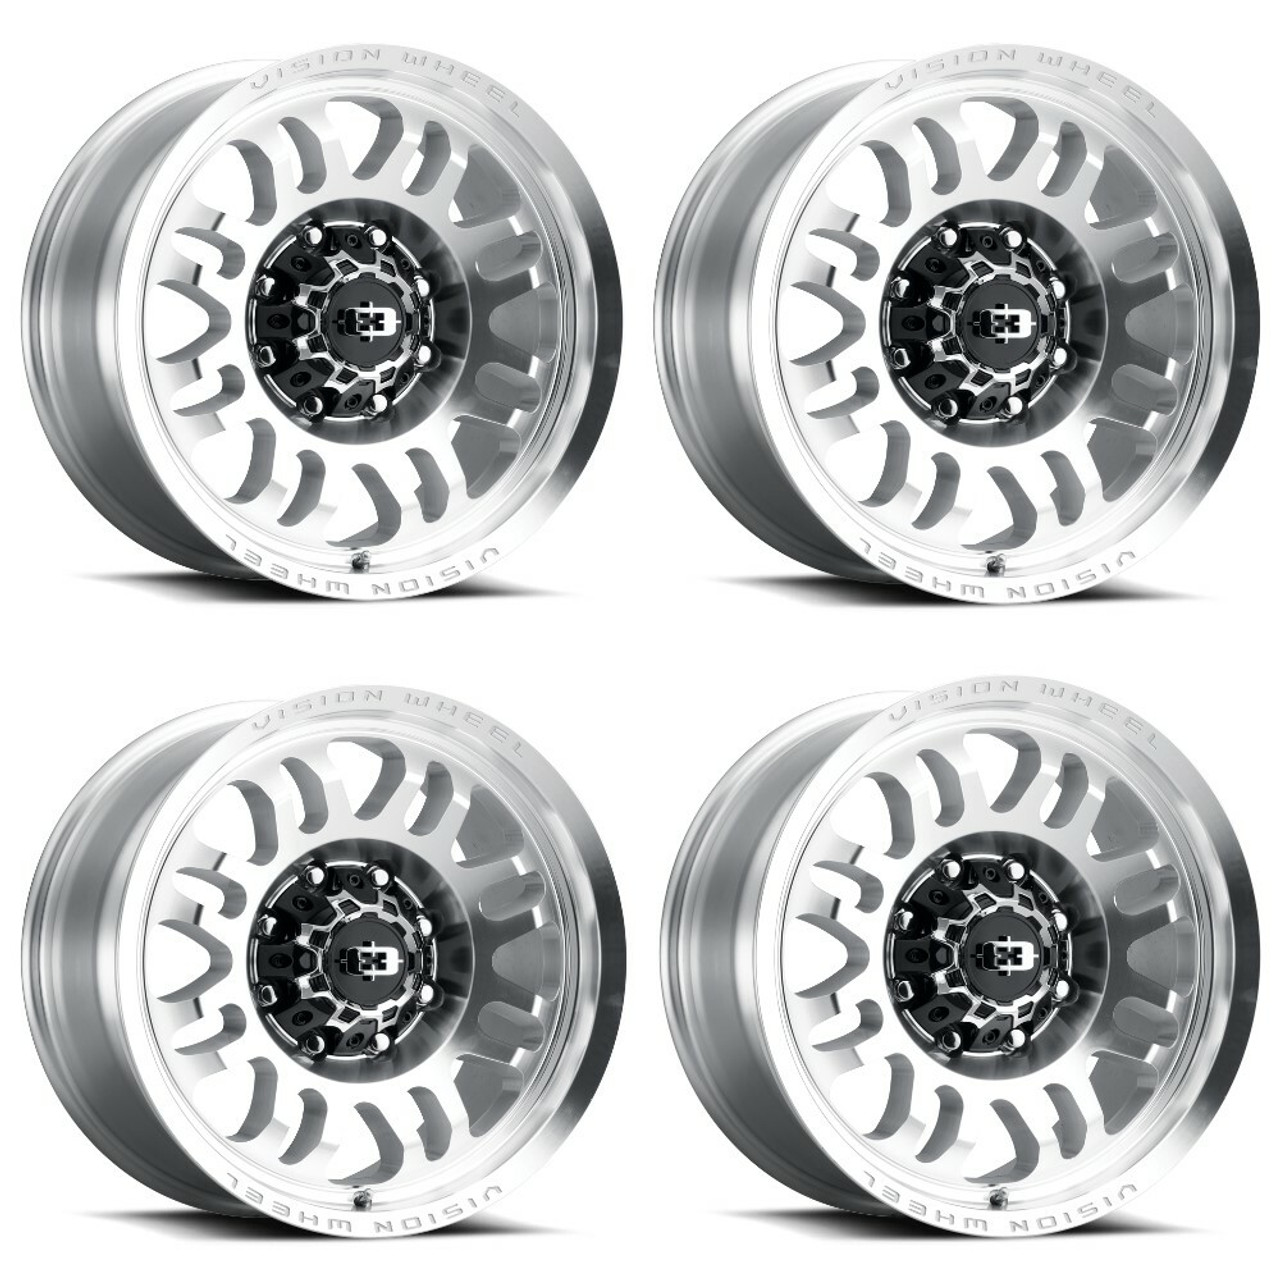 Set 4 17" Vision 409 Inferno Milled Machine 5x150 Wheels 0mm Rims For Toyota